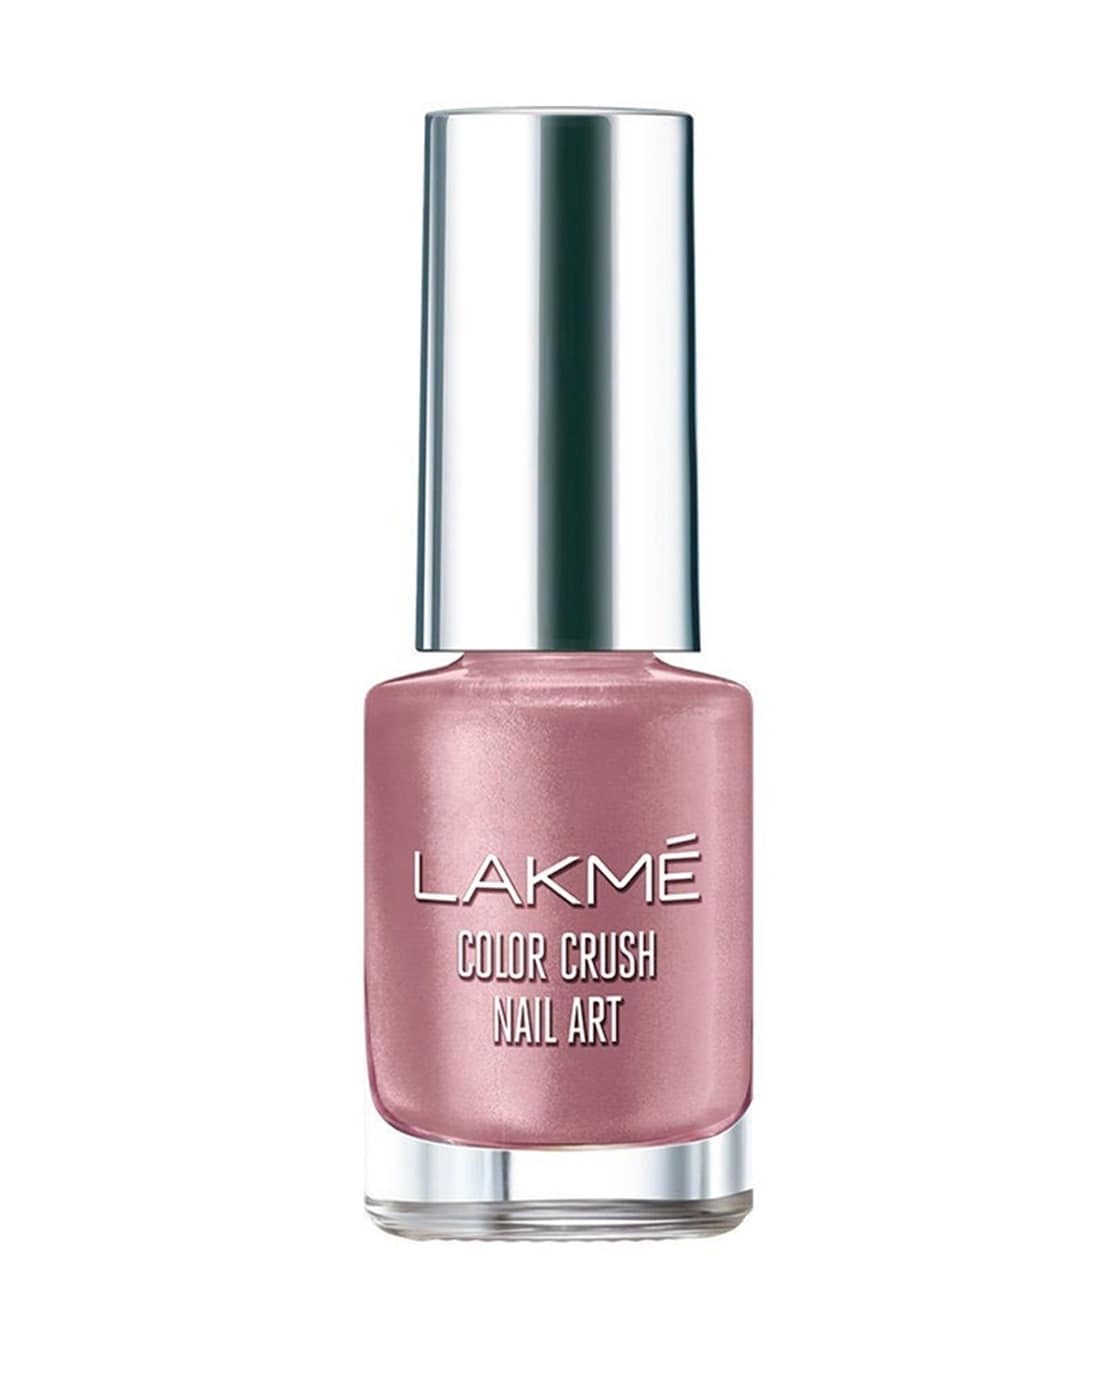 LAKME Color Crush Nail Art in Allahabad at best price by Lakme Salon -  Justdial